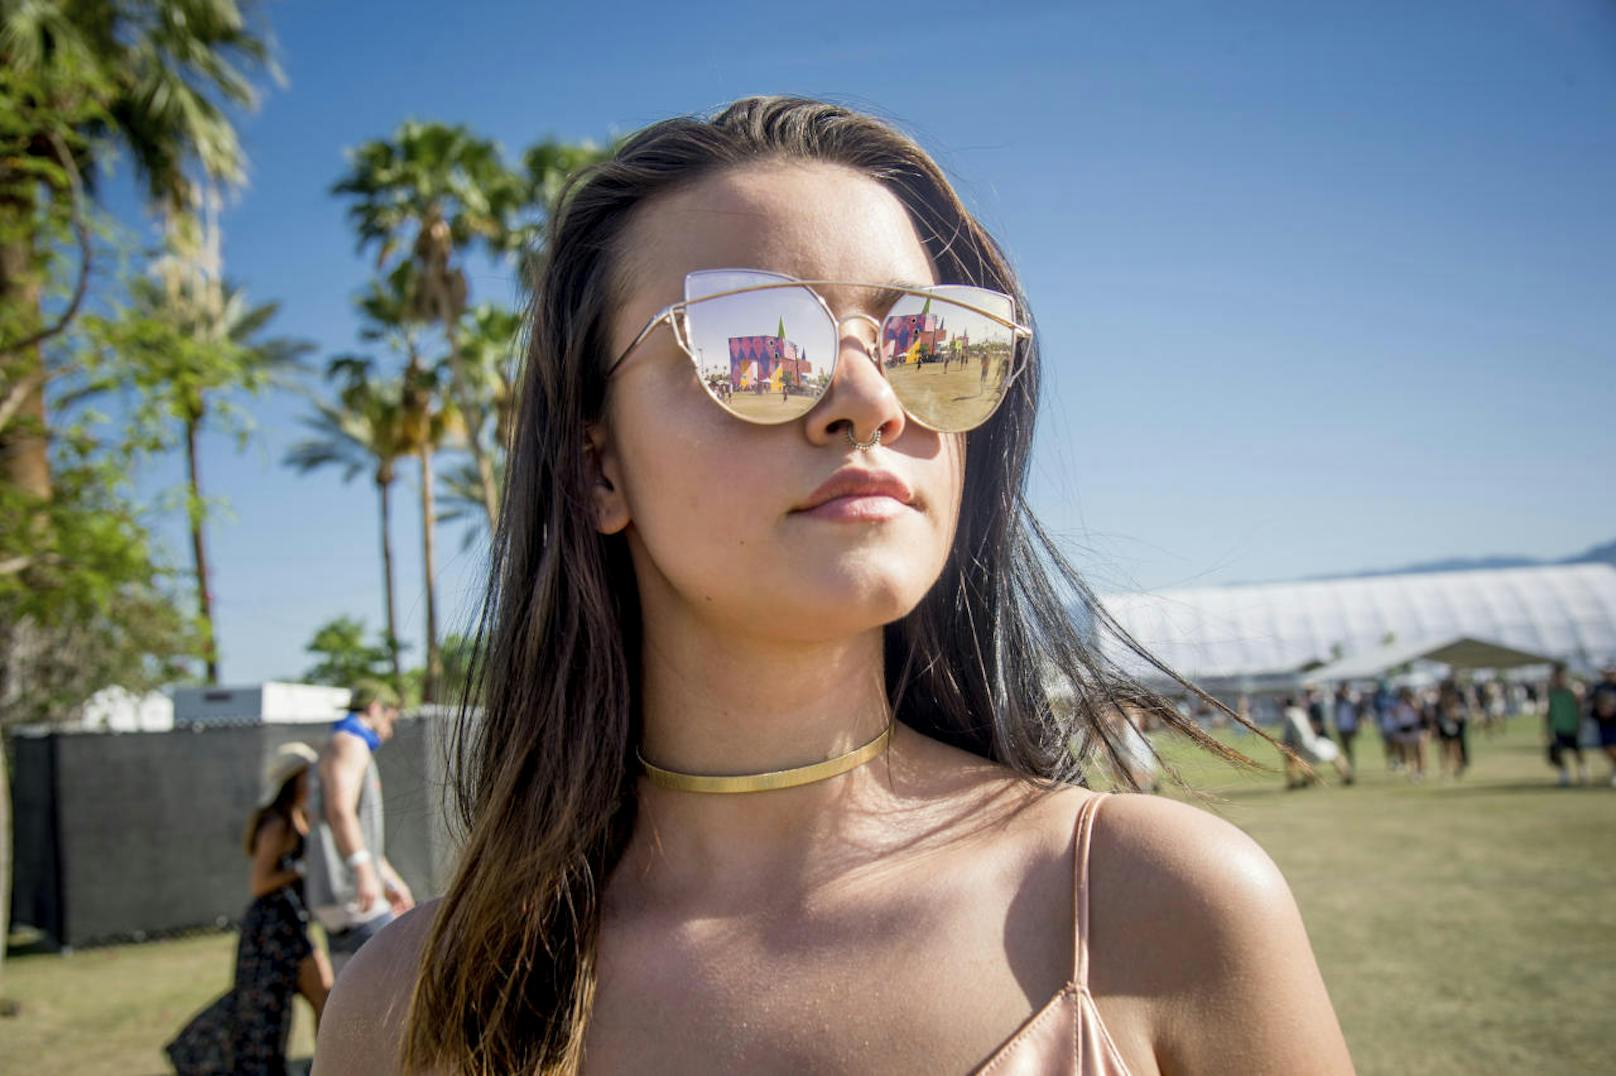 Festival goer Olivia Guerrieri poses at Coachella Music & Arts Festival at the Empire Polo Club on Saturday, April 15, 2017, in Indio, Calif. (Photo by Amy Harris/Invision/AP)